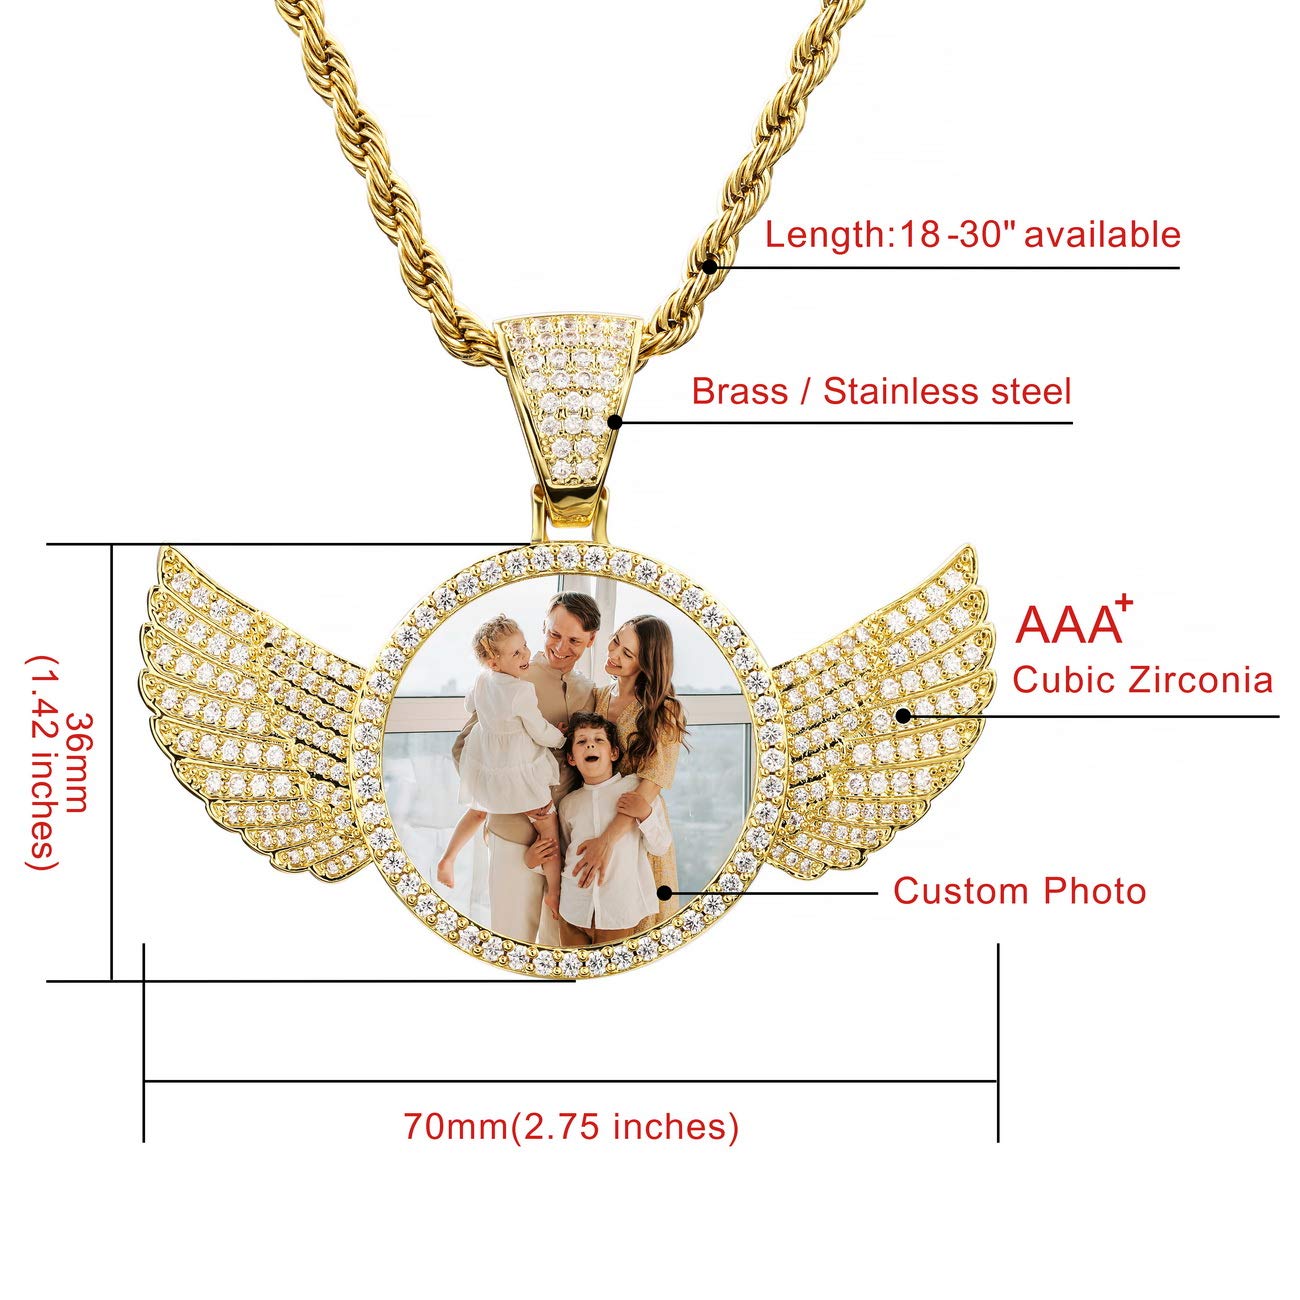 MeMeDIY Personalized Hip Hop Memory Picture Pendant for Men Women Engraving Image/Text/Name/Date Custom Photo Copper Angel Wing & Heart-Shaped & Round Medal with Rope Chain Jewelry Gift